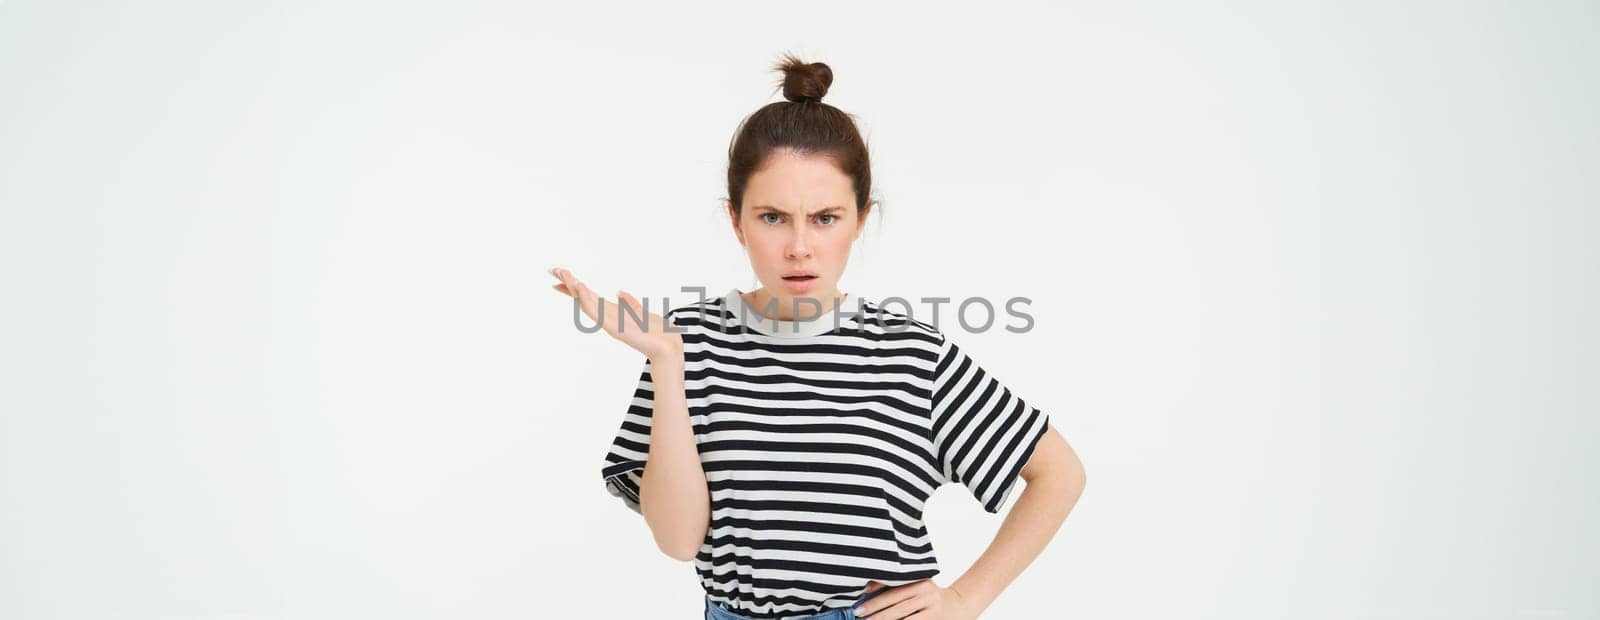 Image of frustrated woman complaining, looking puzzled, shrugging and frowning, standing over white background.